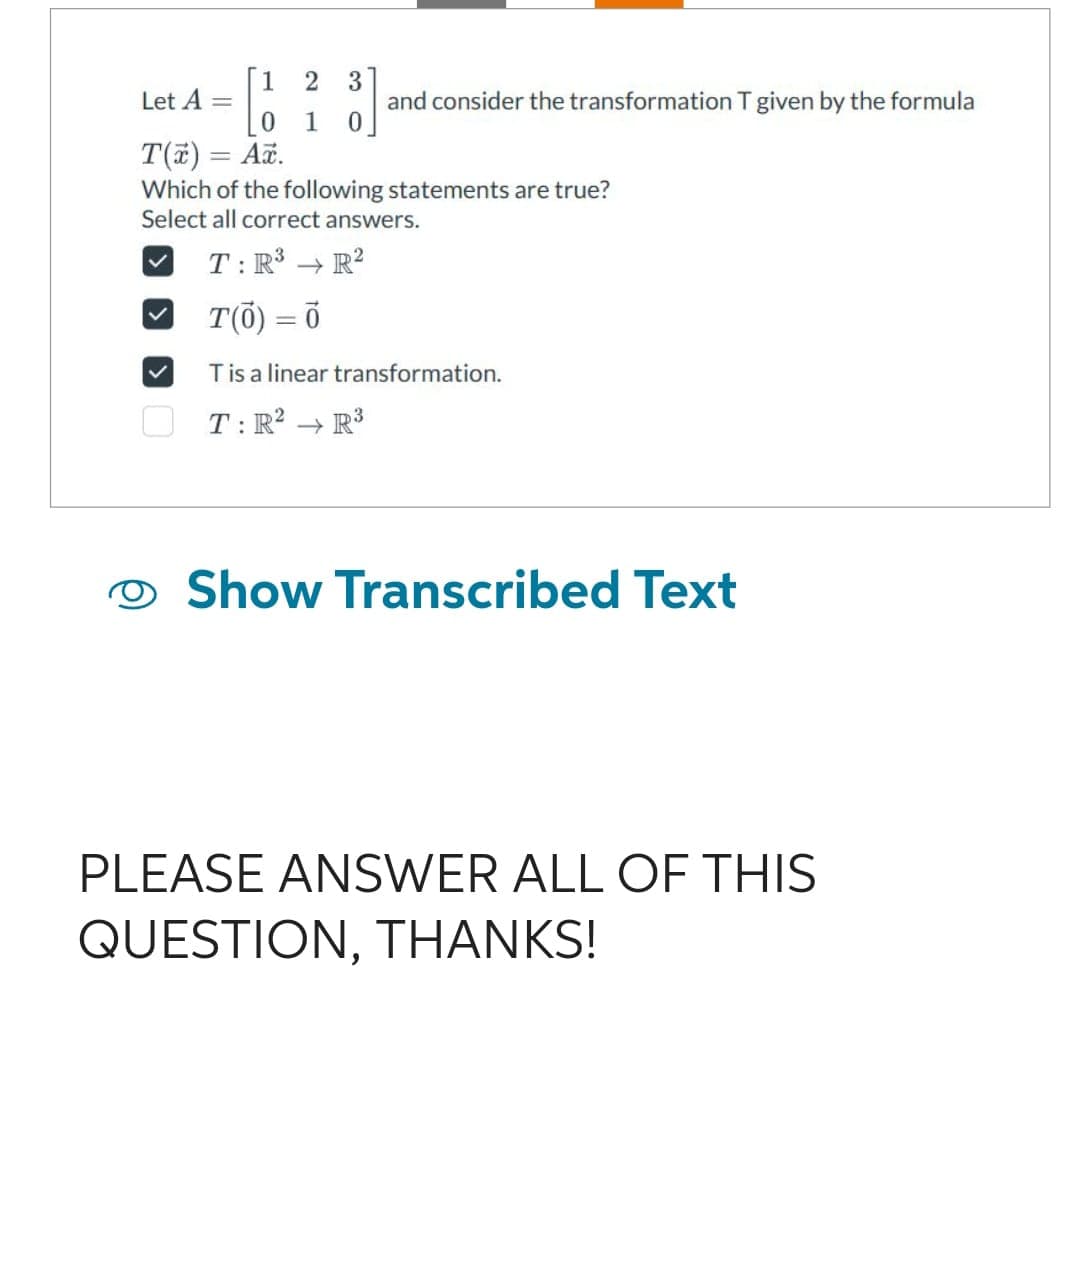 1
2
0 1
Let A =
T(x) = Ax.
3
and consider the transformation T given by the formula
Which of the following statements are true?
Select all correct answers.
T: R³ → R²
T(0) = 0
T is a linear transformation.
T: R² R³
Show Transcribed Text
PLEASE ANSWER ALL OF THIS
QUESTION, THANKS!